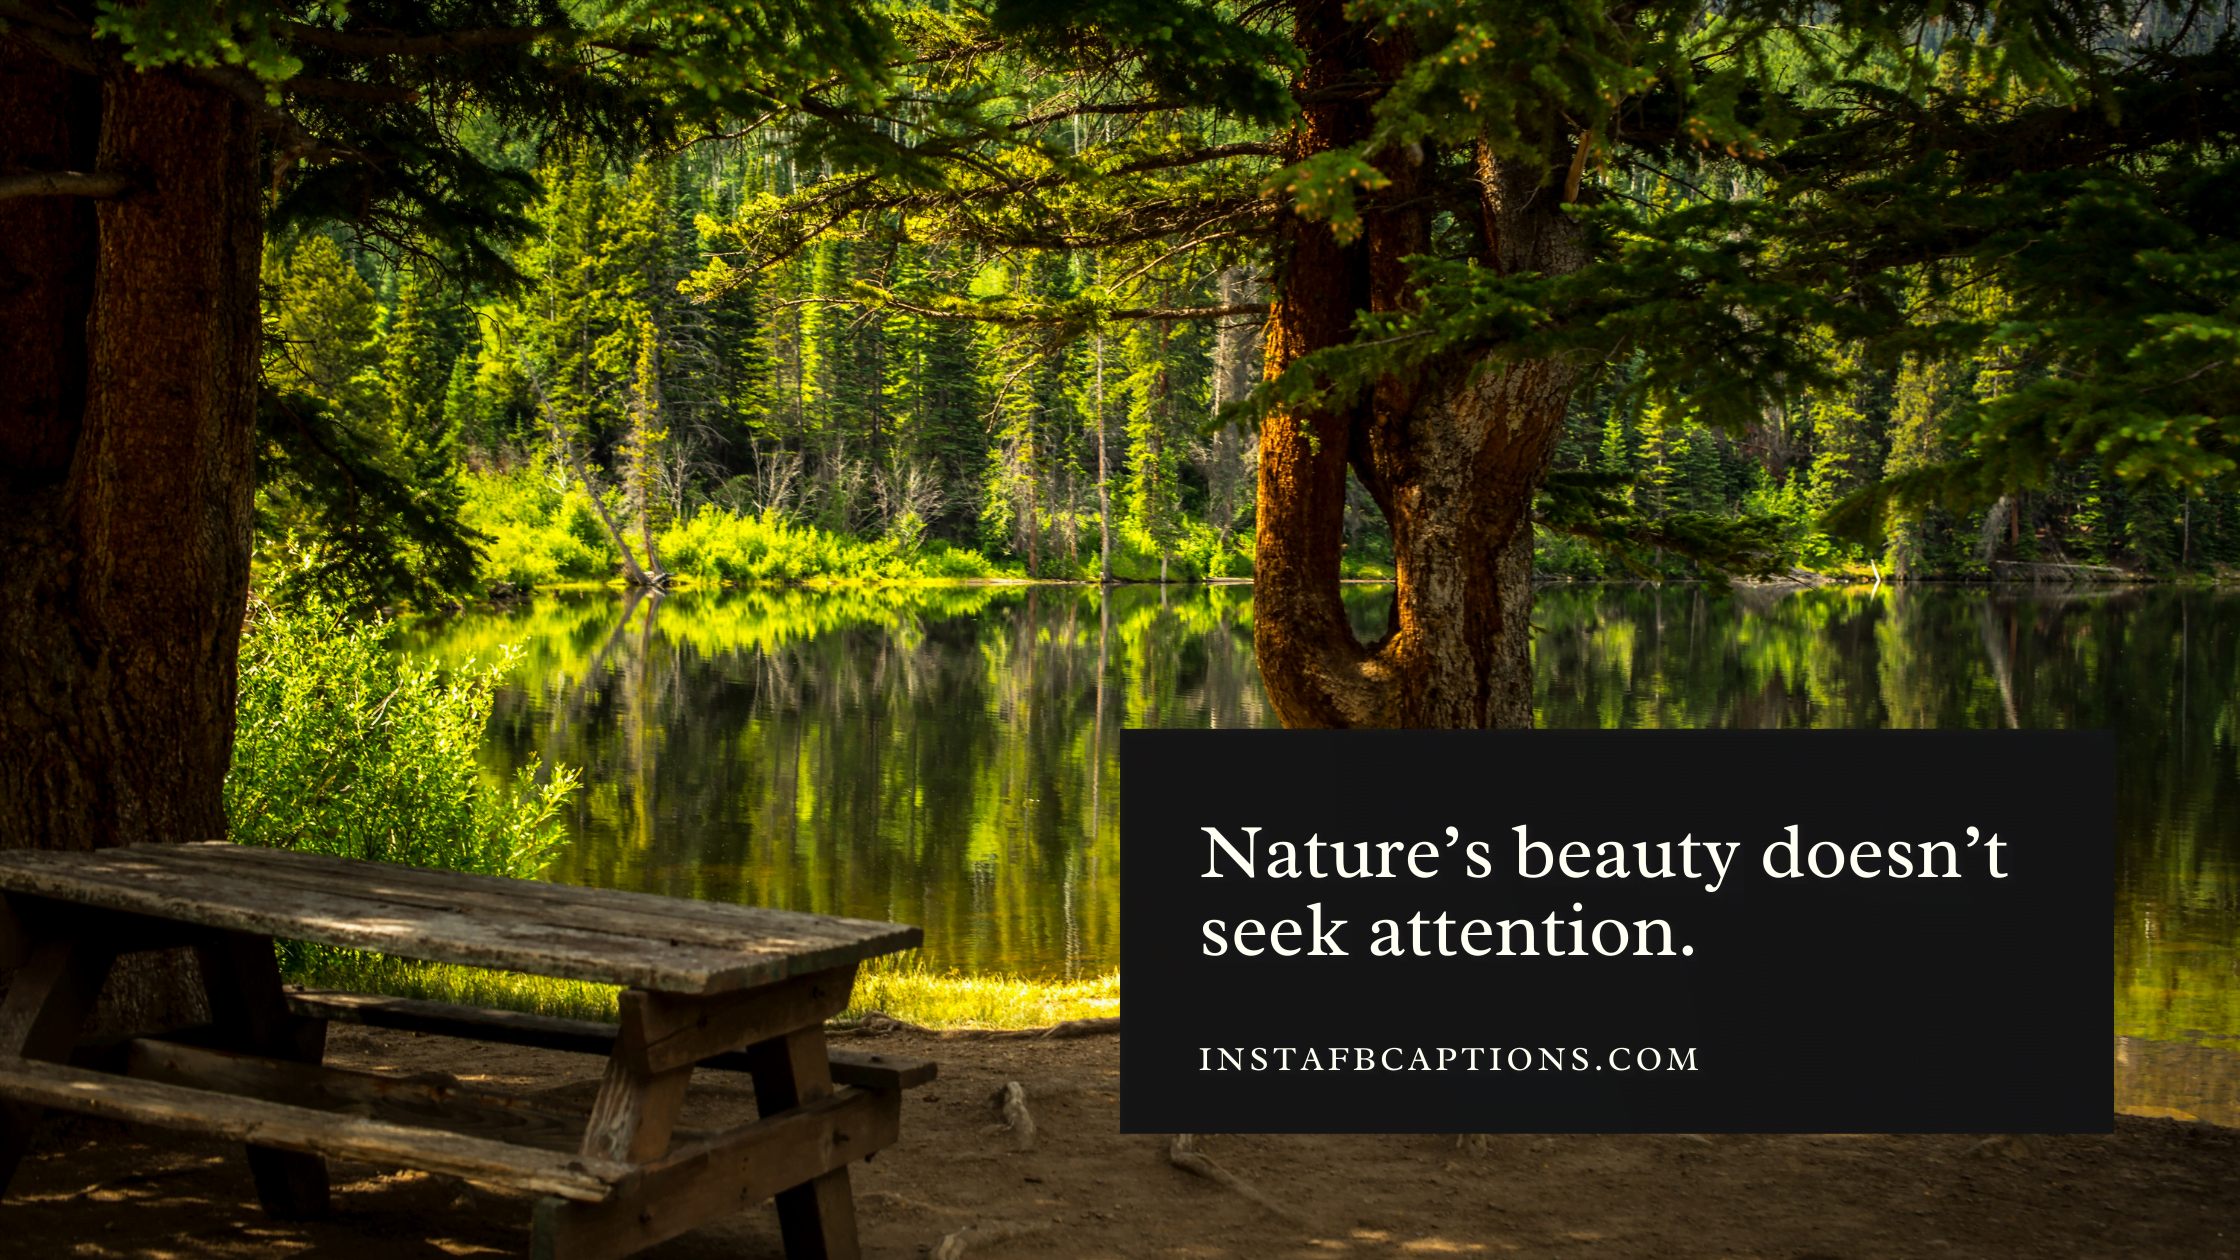 Simple Nature Captions For Instagram  - Simple Nature Captions for Instagram - 130+ NATURE Instagram Captions 2022